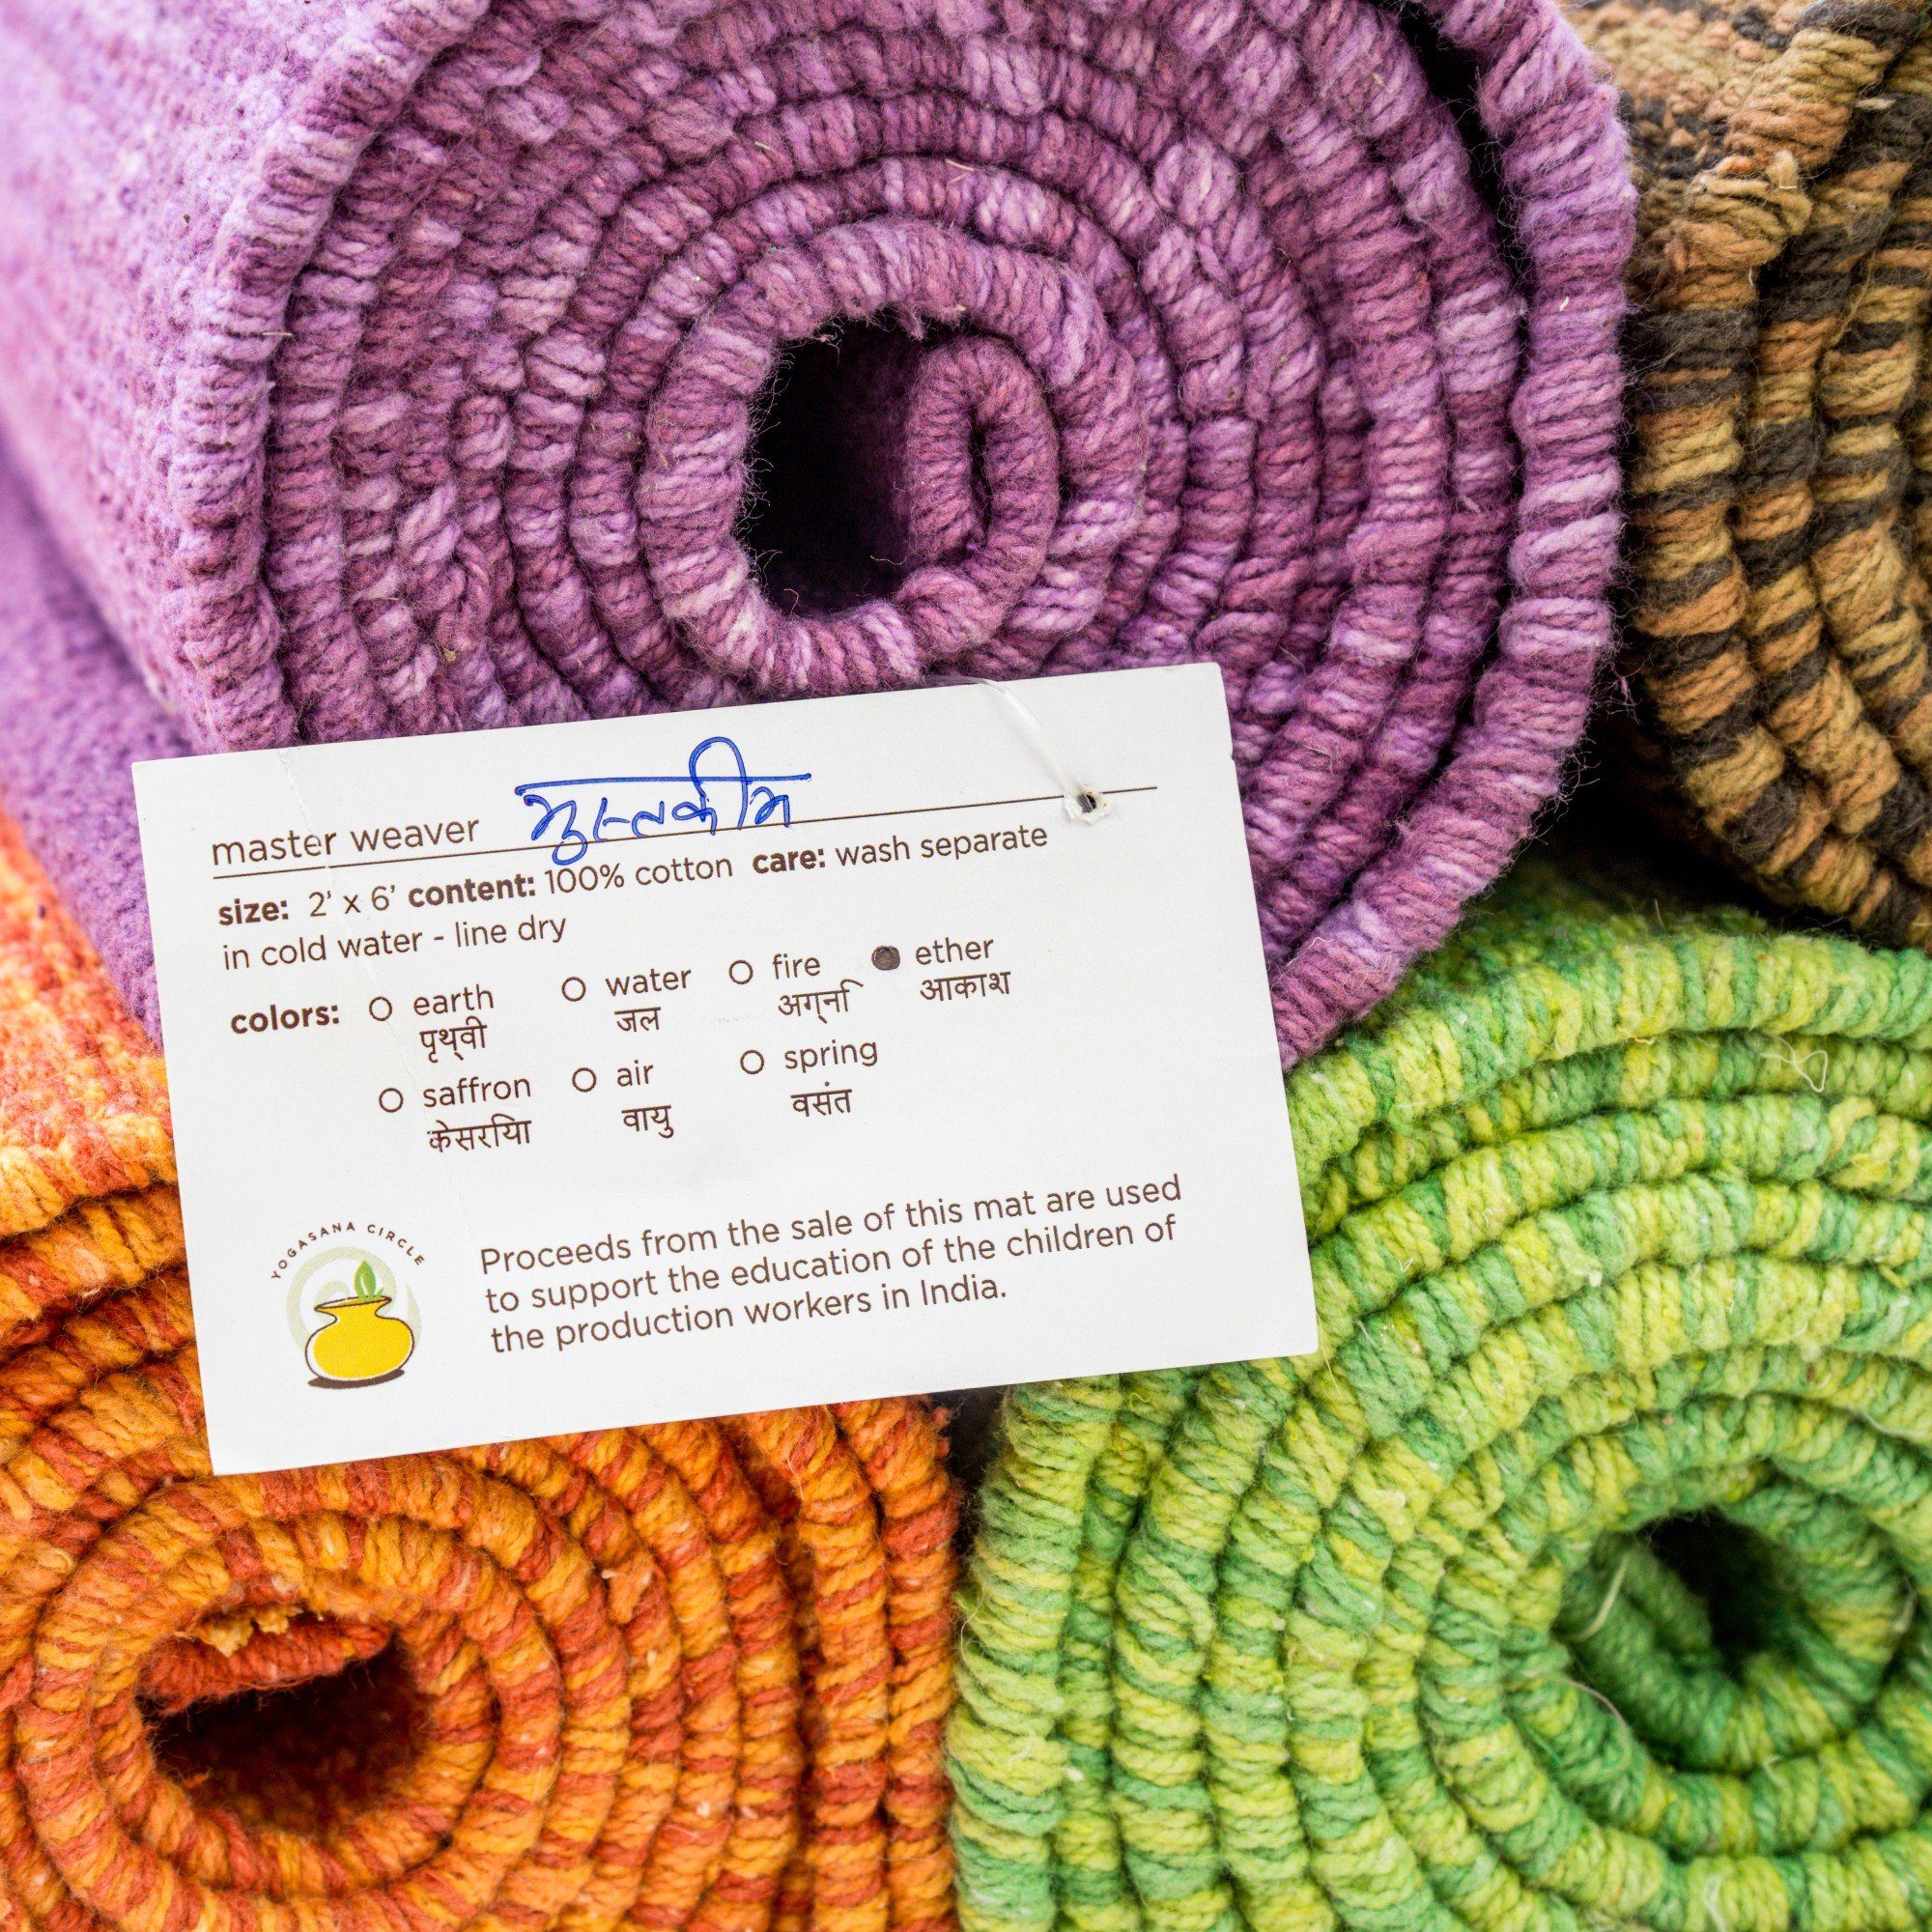 Rolled up organic cotton yoga mats with the weaver's signature card